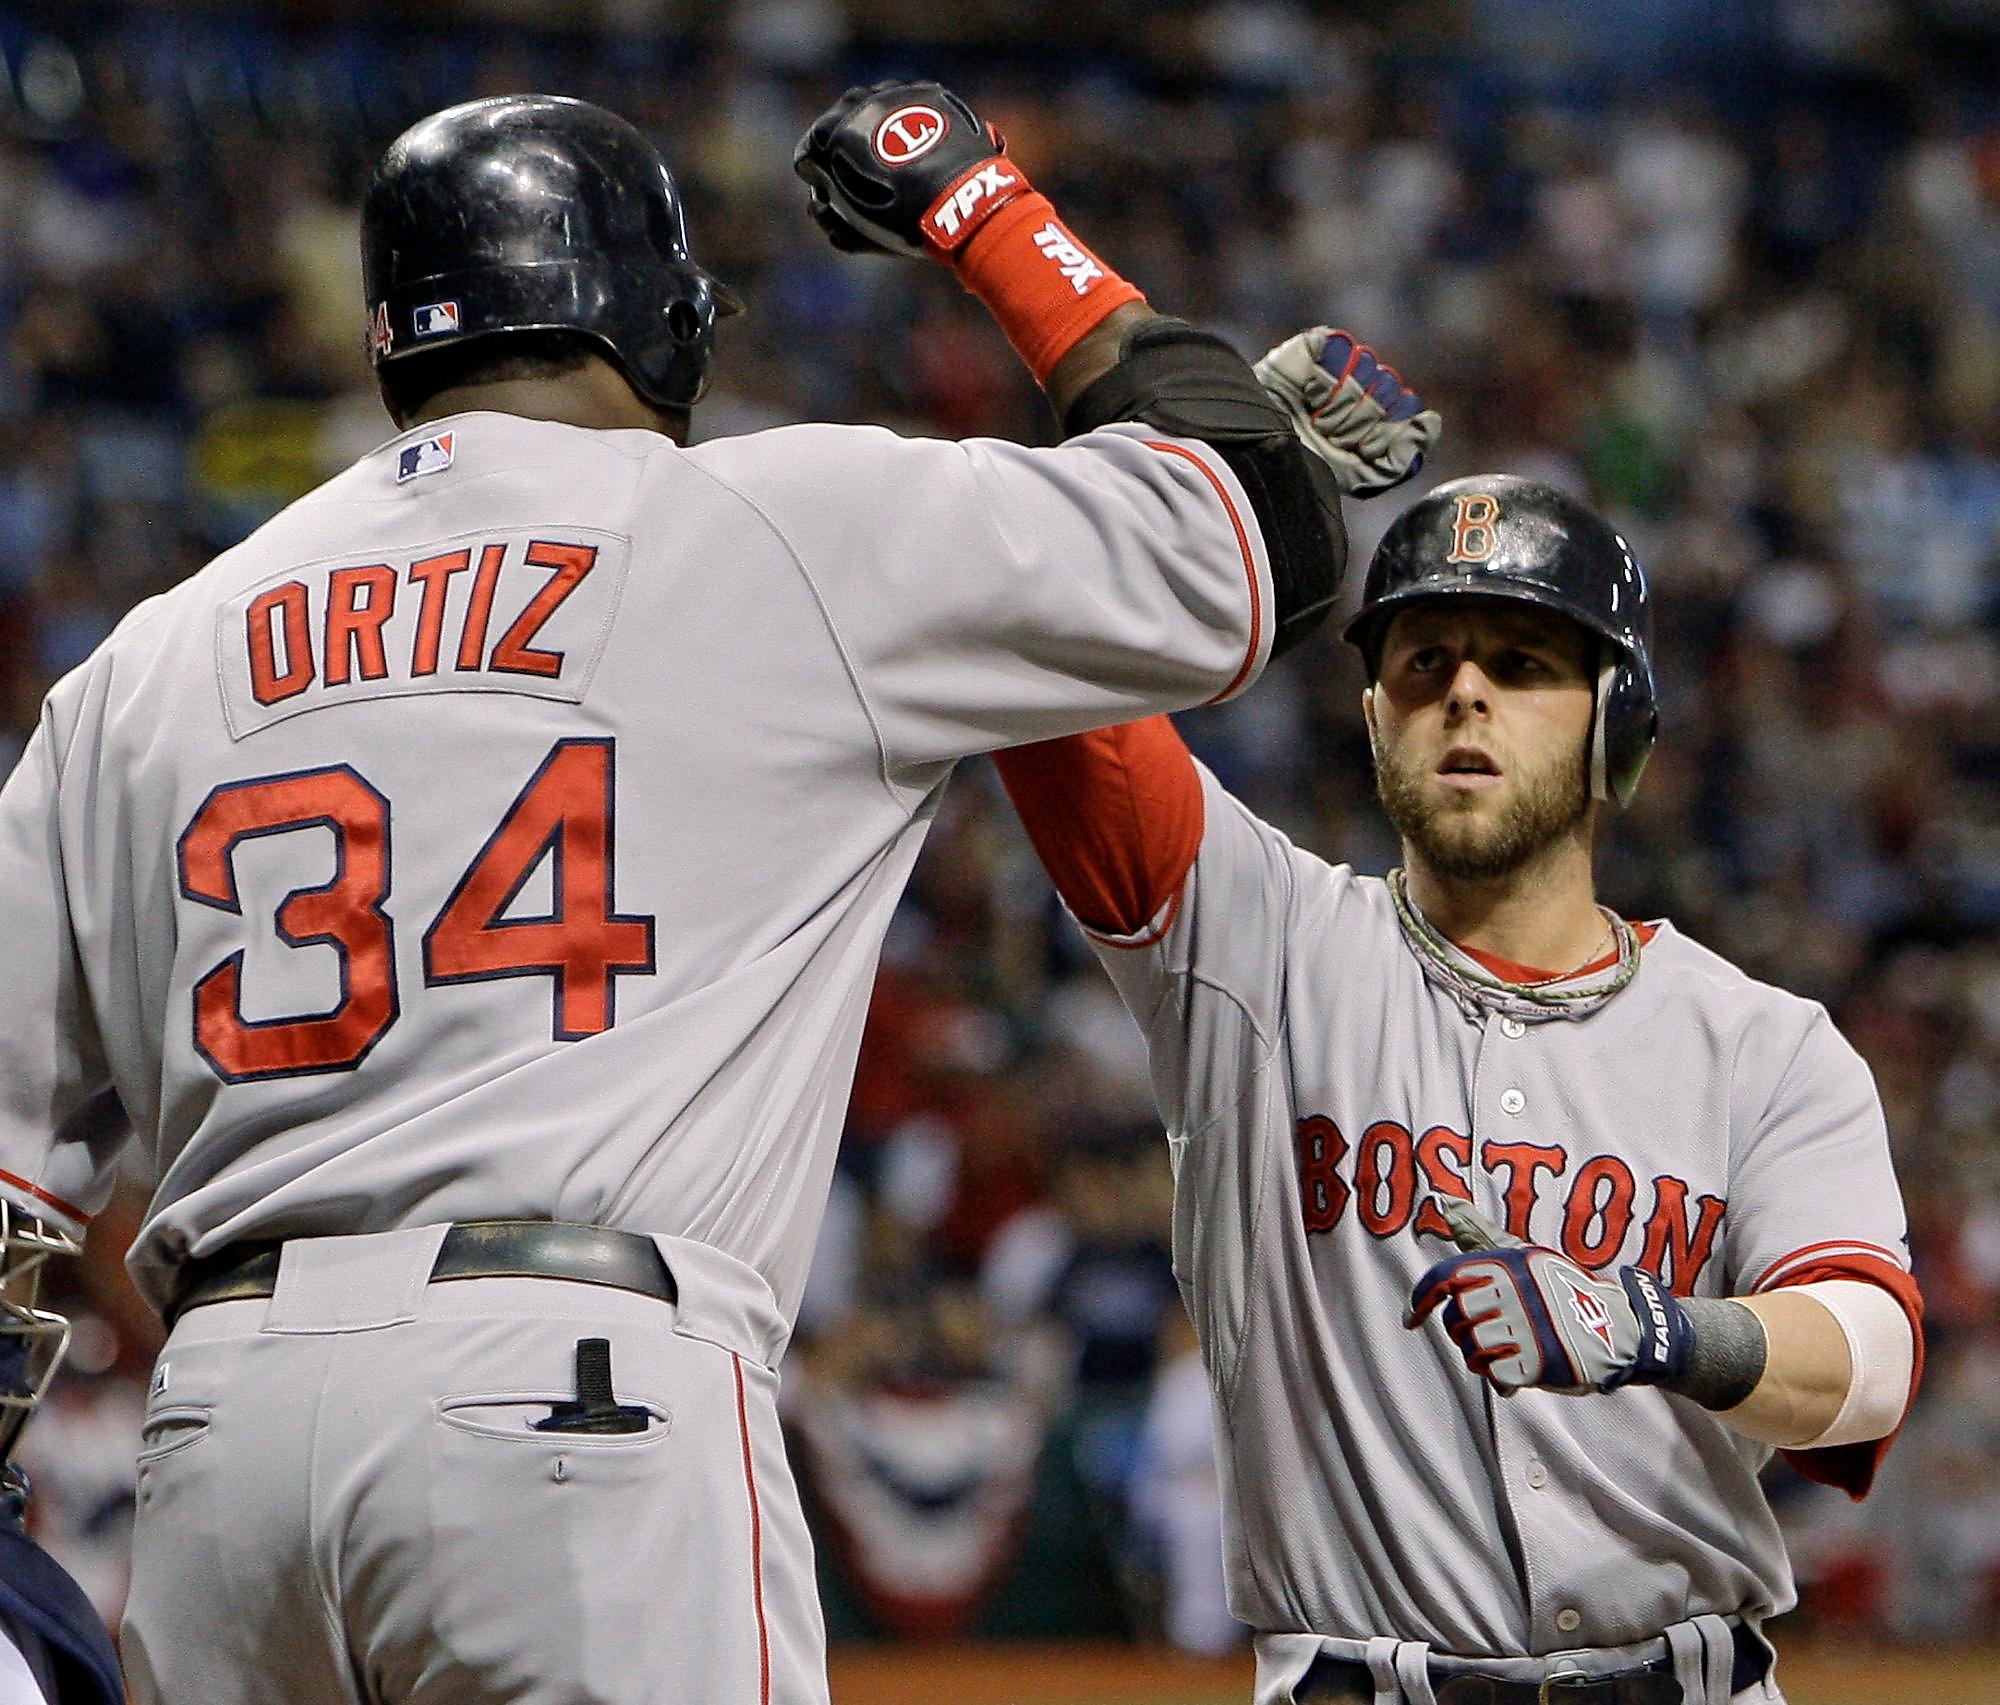 Is Dustin Pedroia Having the Worst Year of His Career?